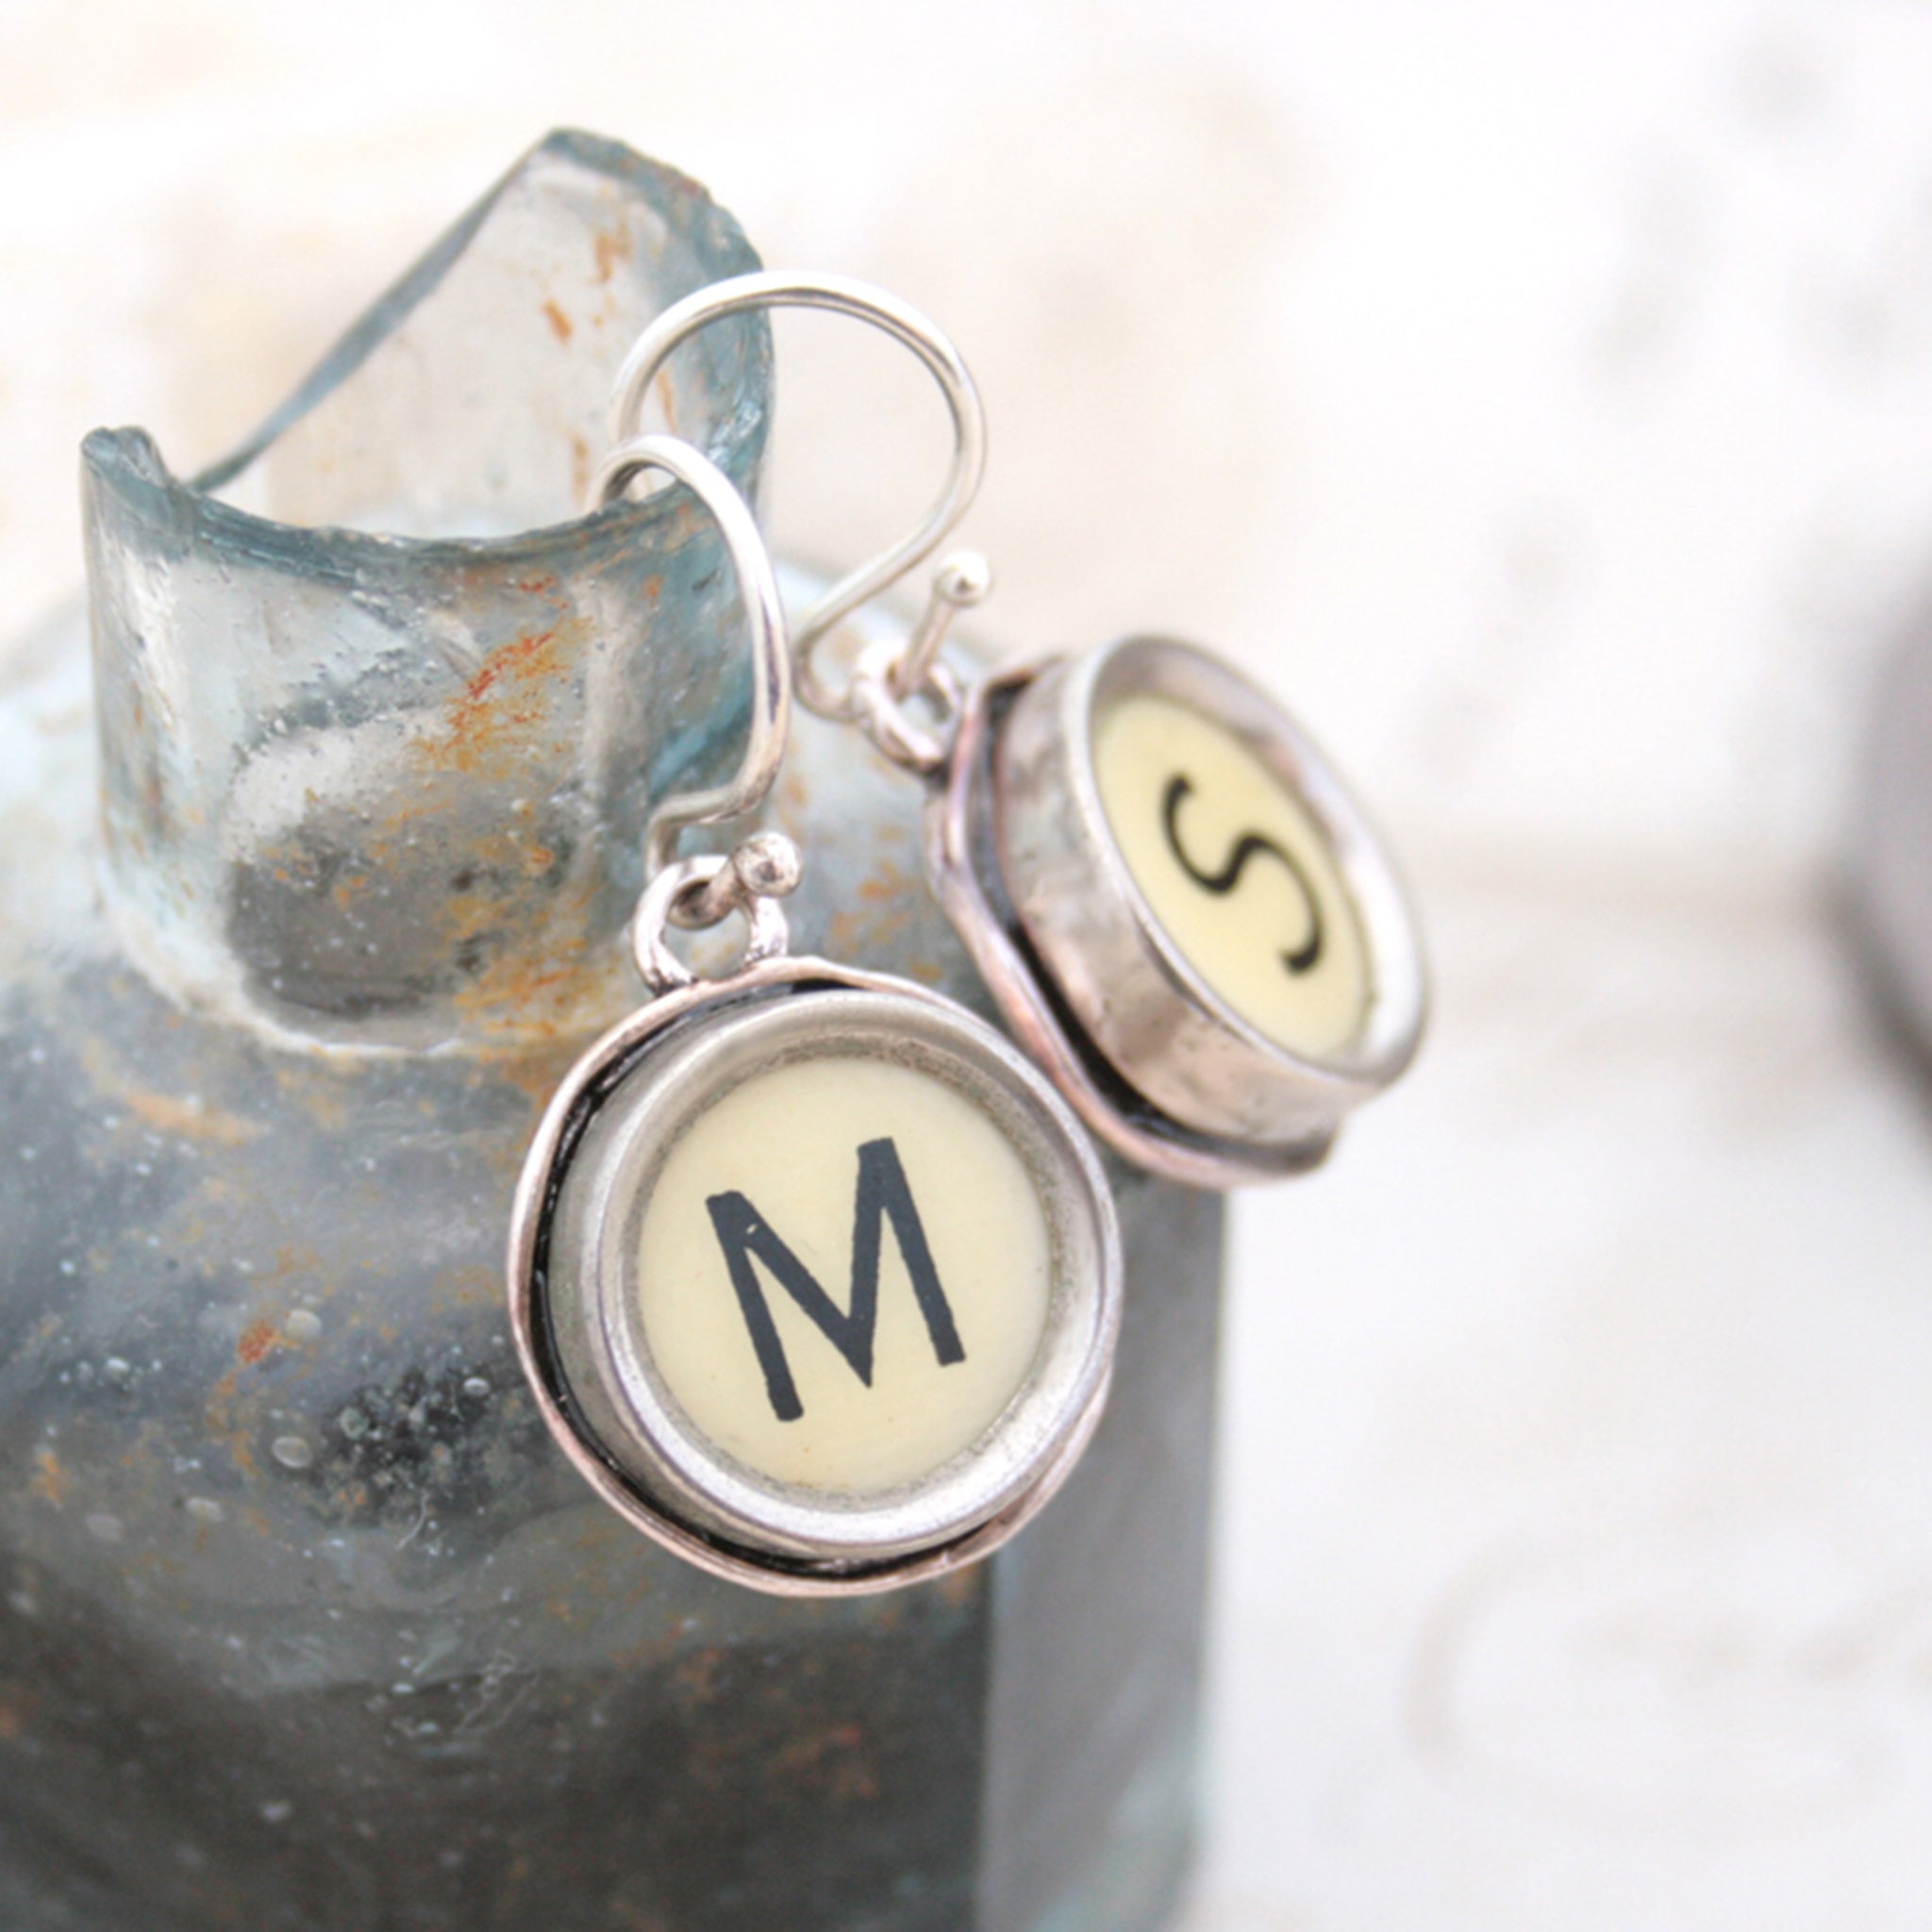 M and S Ivory Typewriter keys turned into initial earrings hanging on the edge of inkwell